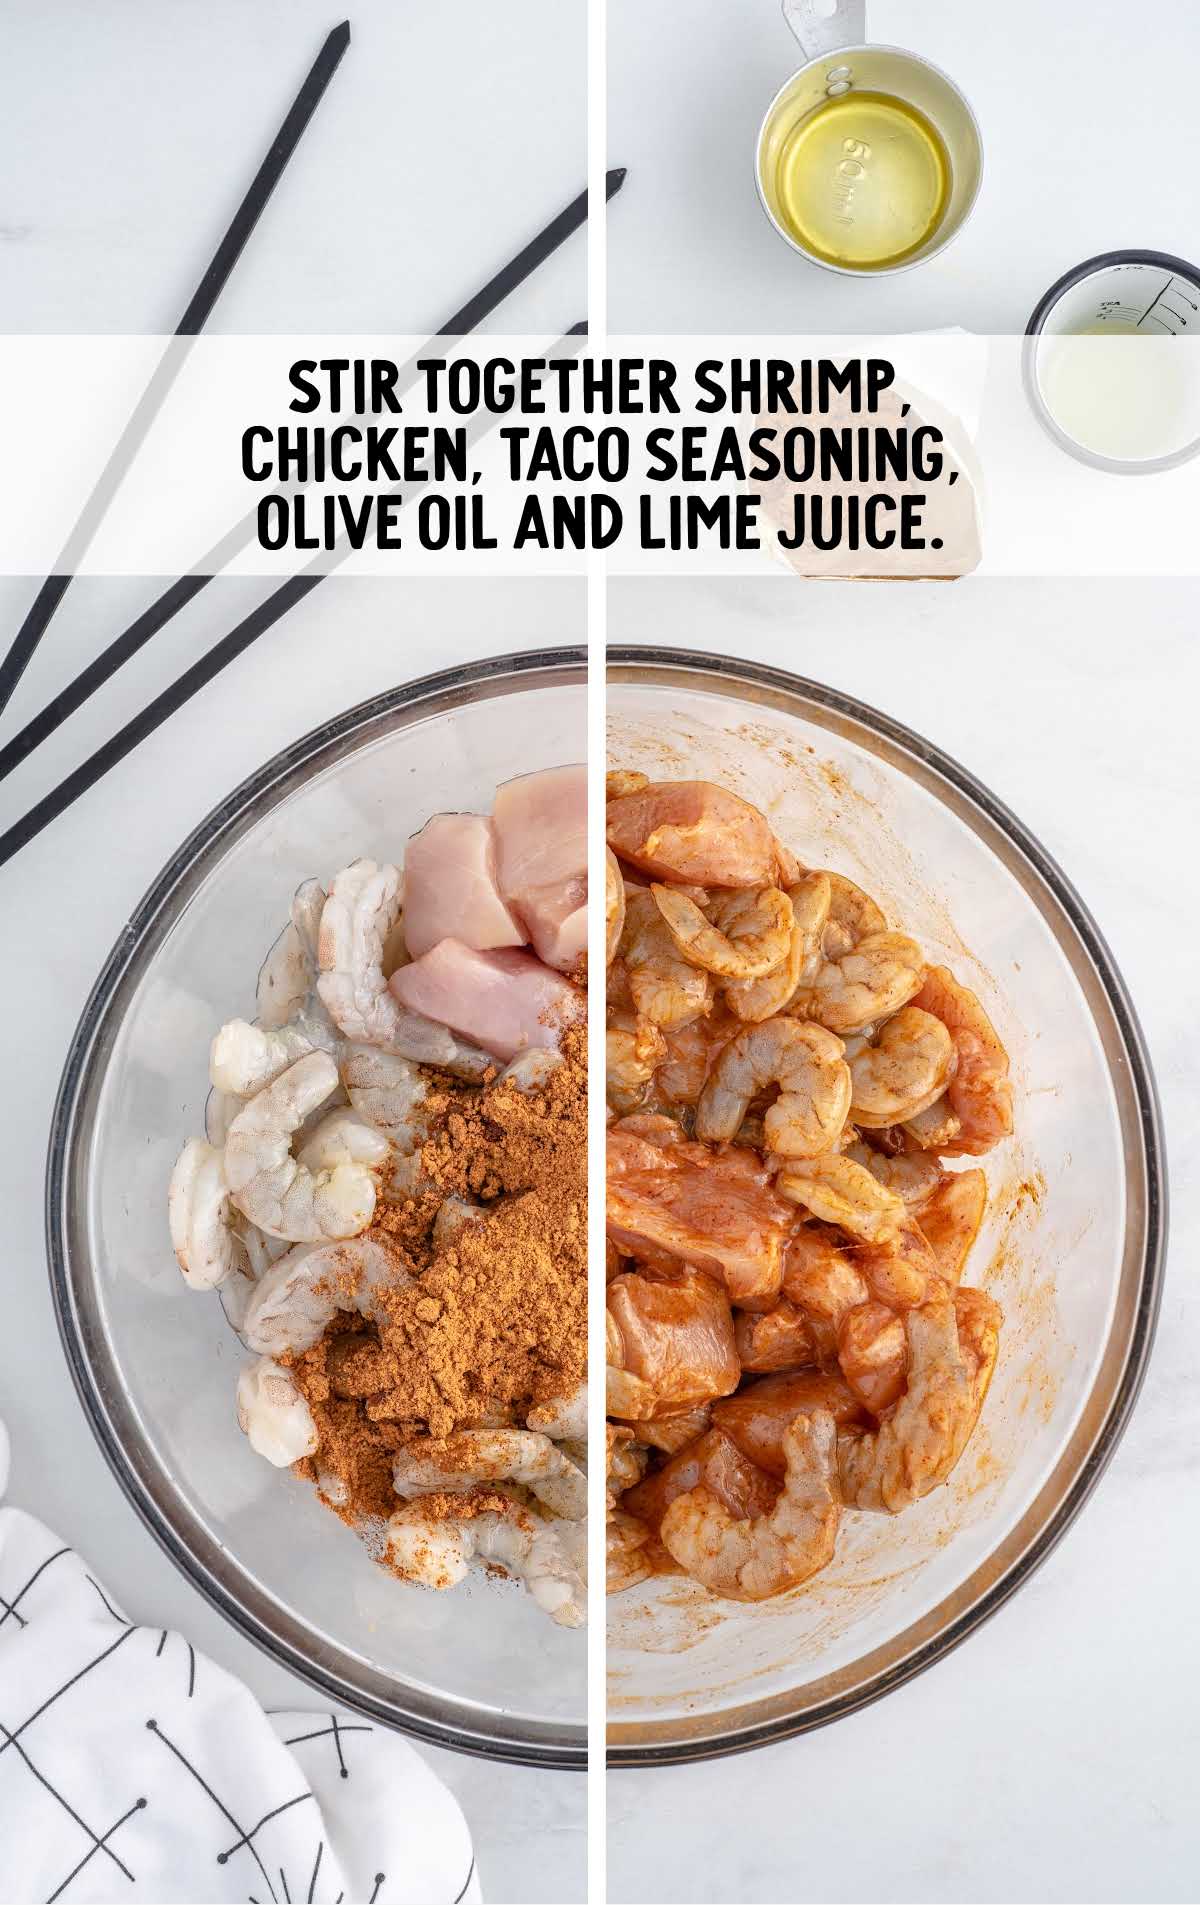 shrimp, chicken, taco seasoning, olive oil and lime juice in a bowl and then stir together in a bowl